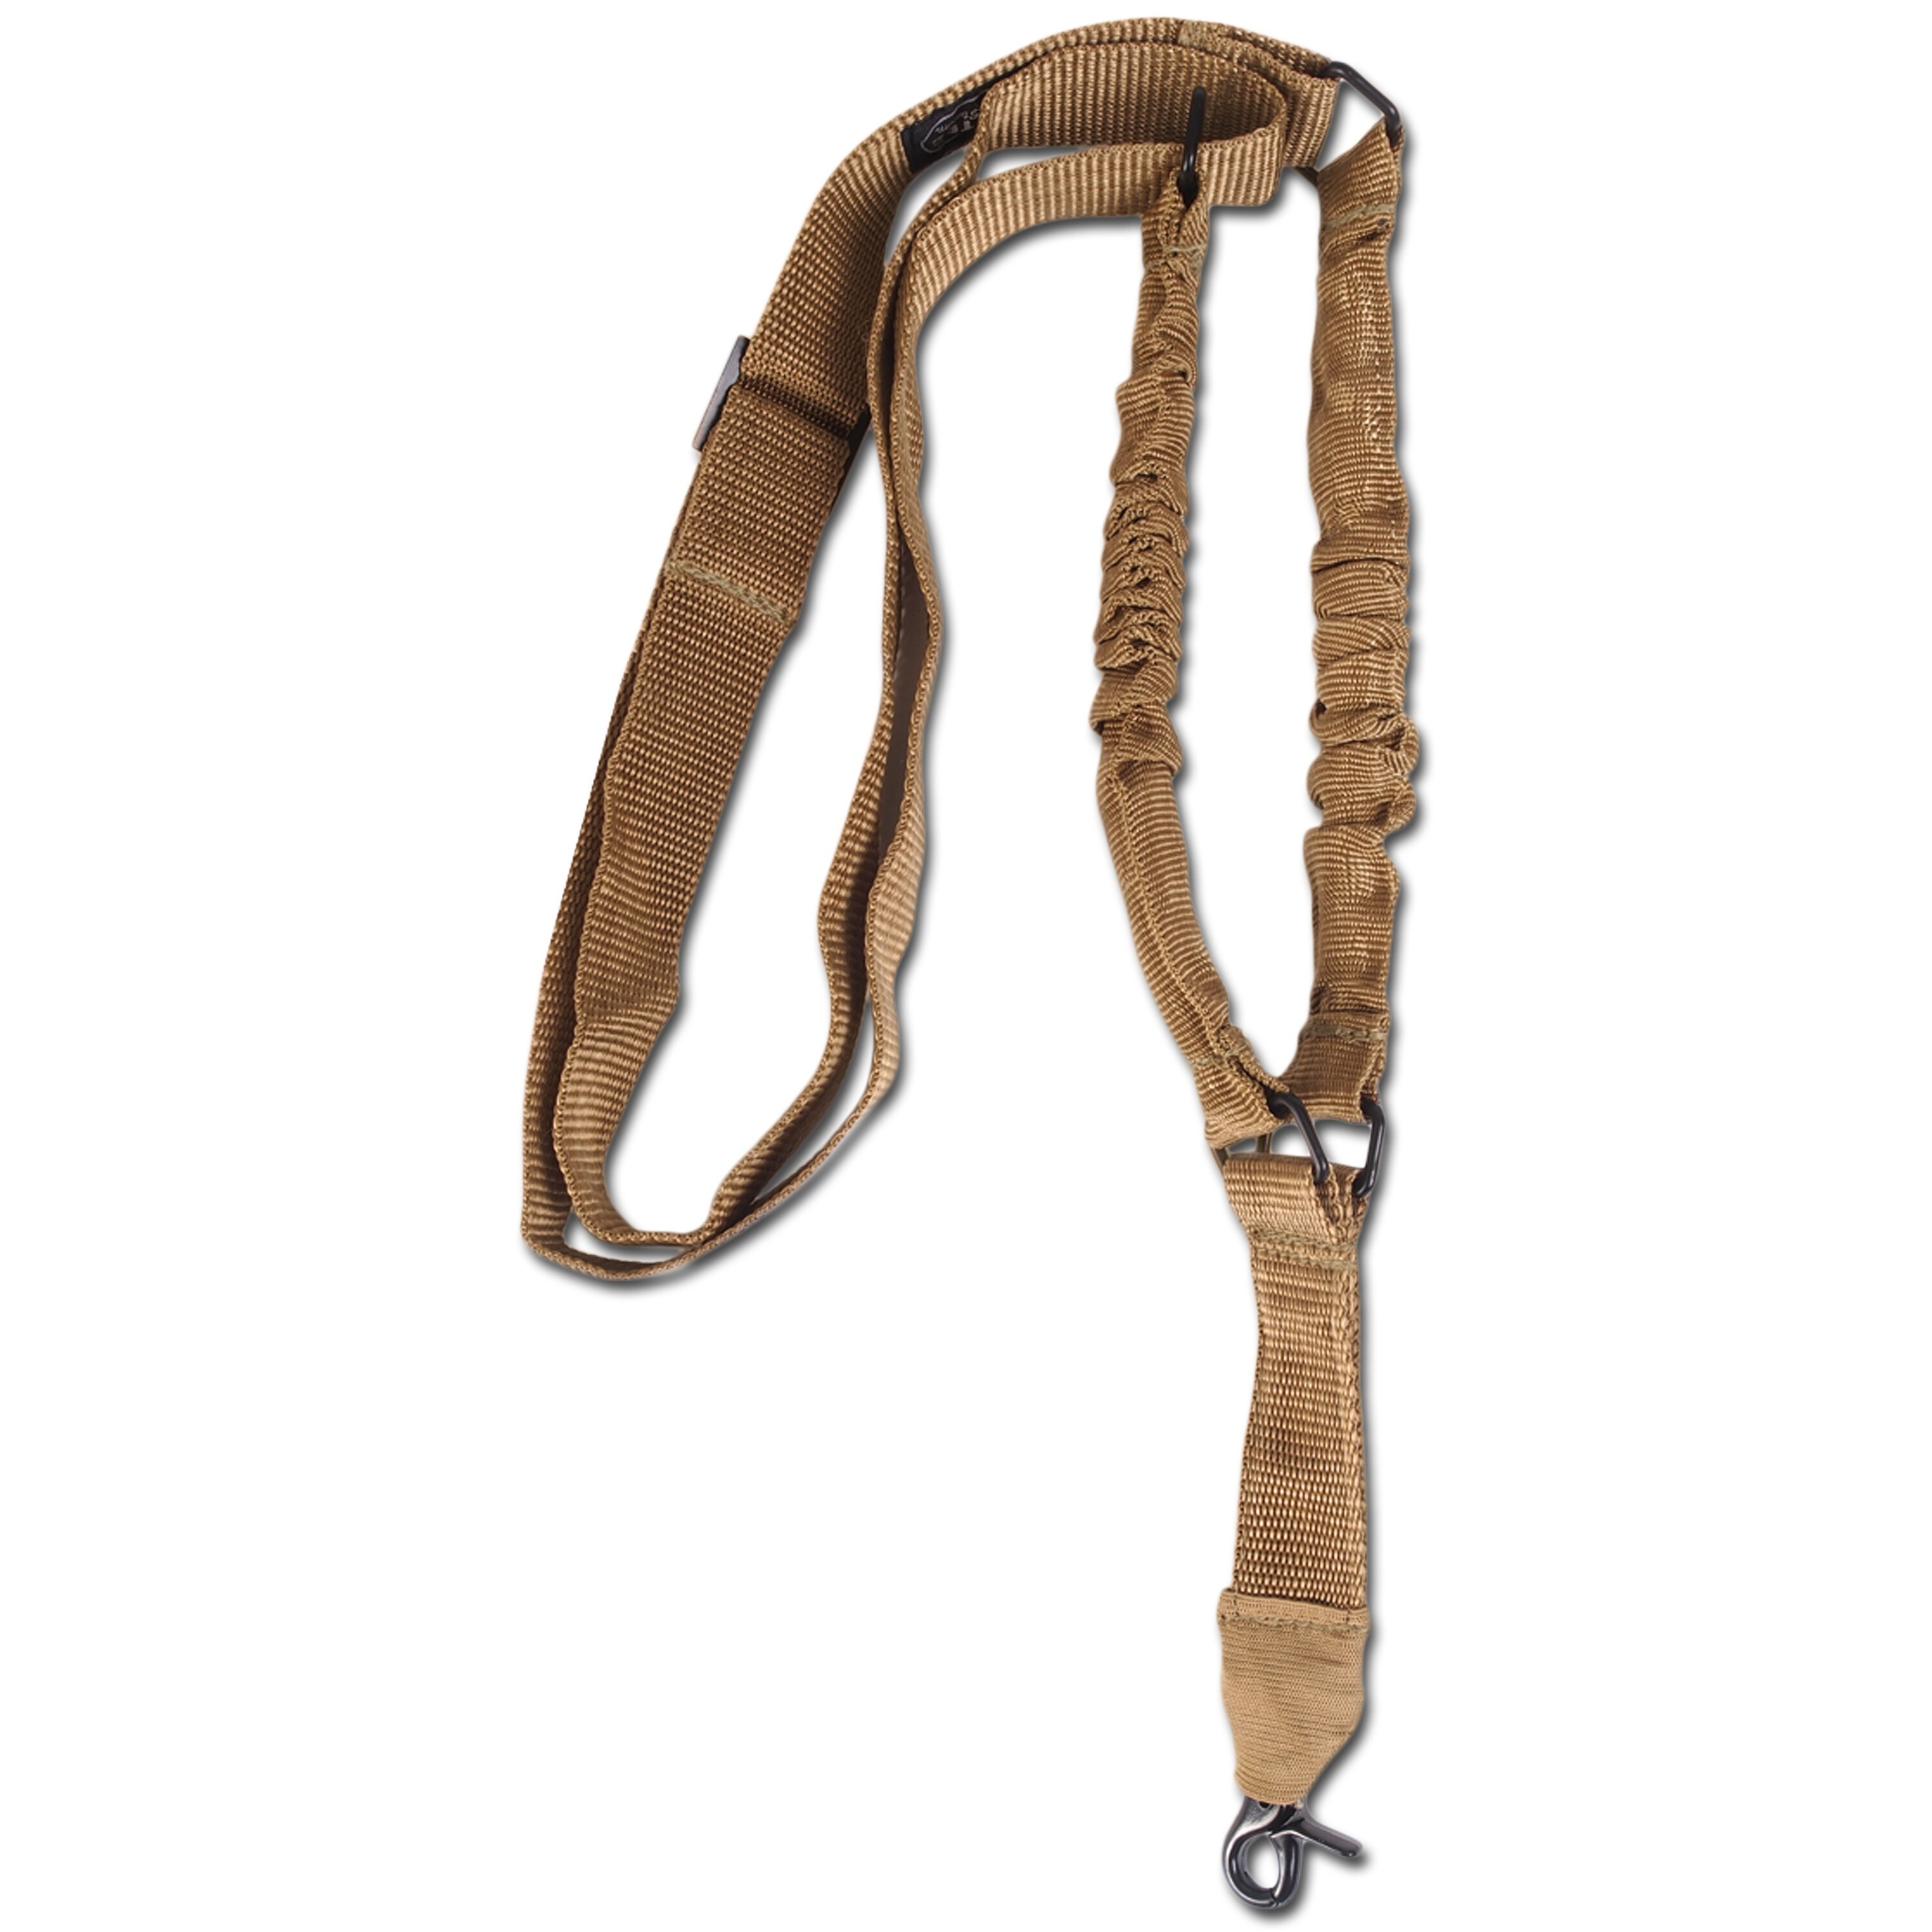 Rifle Sling Tactical Single Point, coyote | Rifle Sling Tactical Single ...